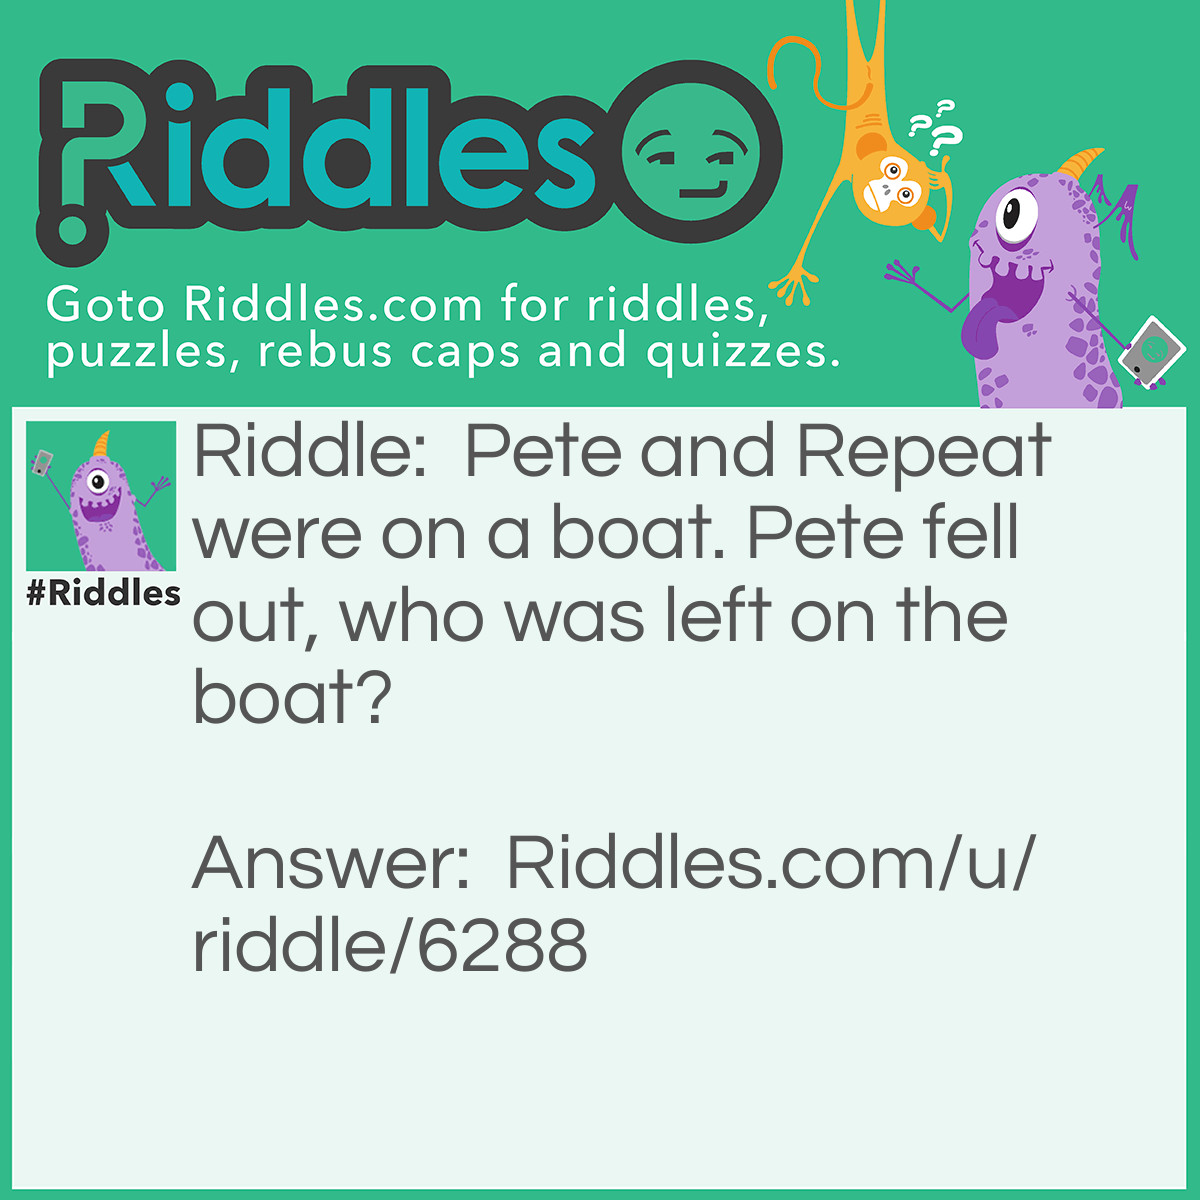 Riddle: Pete and Repeat were on a boat. Pete fell out, who was left on the boat? Answer: Repeat! Pete and Repeat were on a boat. Pete fell out, who was left on the boat? Repeat! Pete and Repeat were on a boat. Pete fell out, who was left on the boat? Repeat! Pete and Repeat were on a boat. Pete fell out, who was left on the boat? Repeat! Pete and Repeat were on a boat. Pete fell out, who was left on the boat? Repeat! Ex